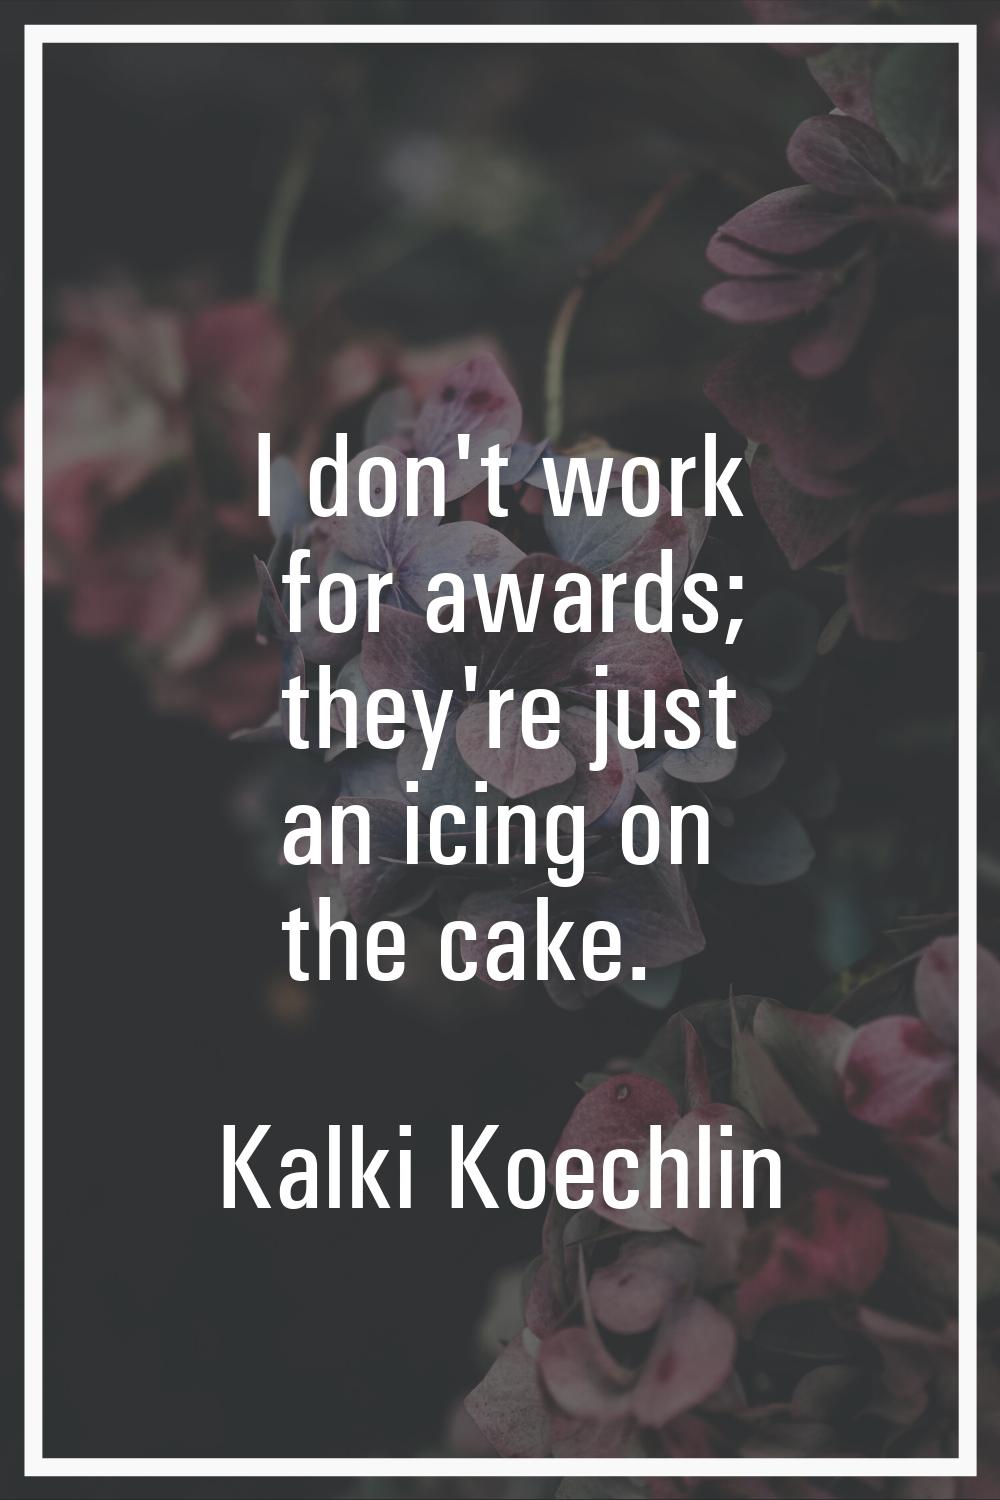 I don't work for awards; they're just an icing on the cake.